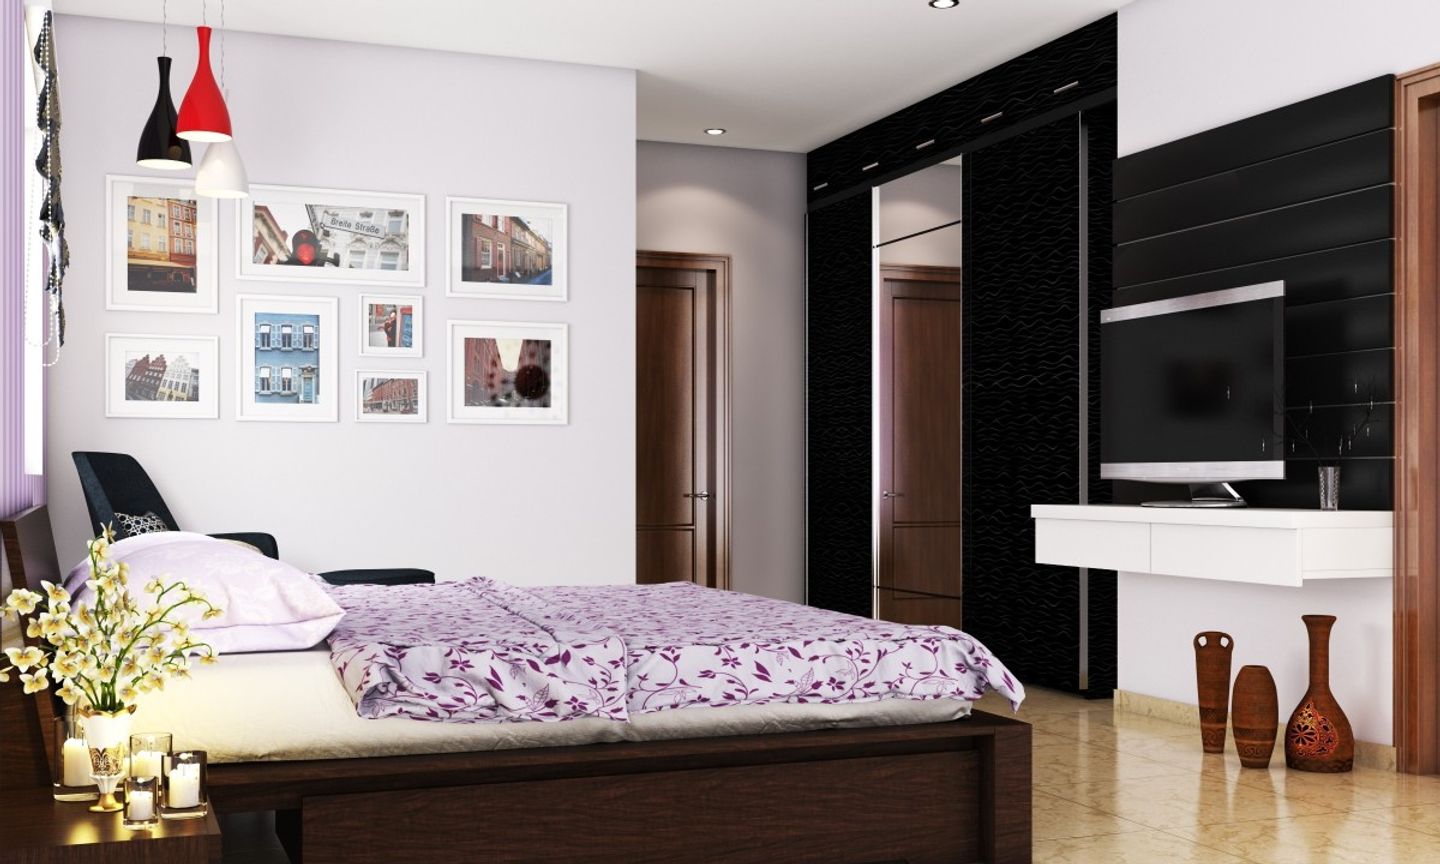 Modern Bedroom Design In Black And Brown With Wallpaper